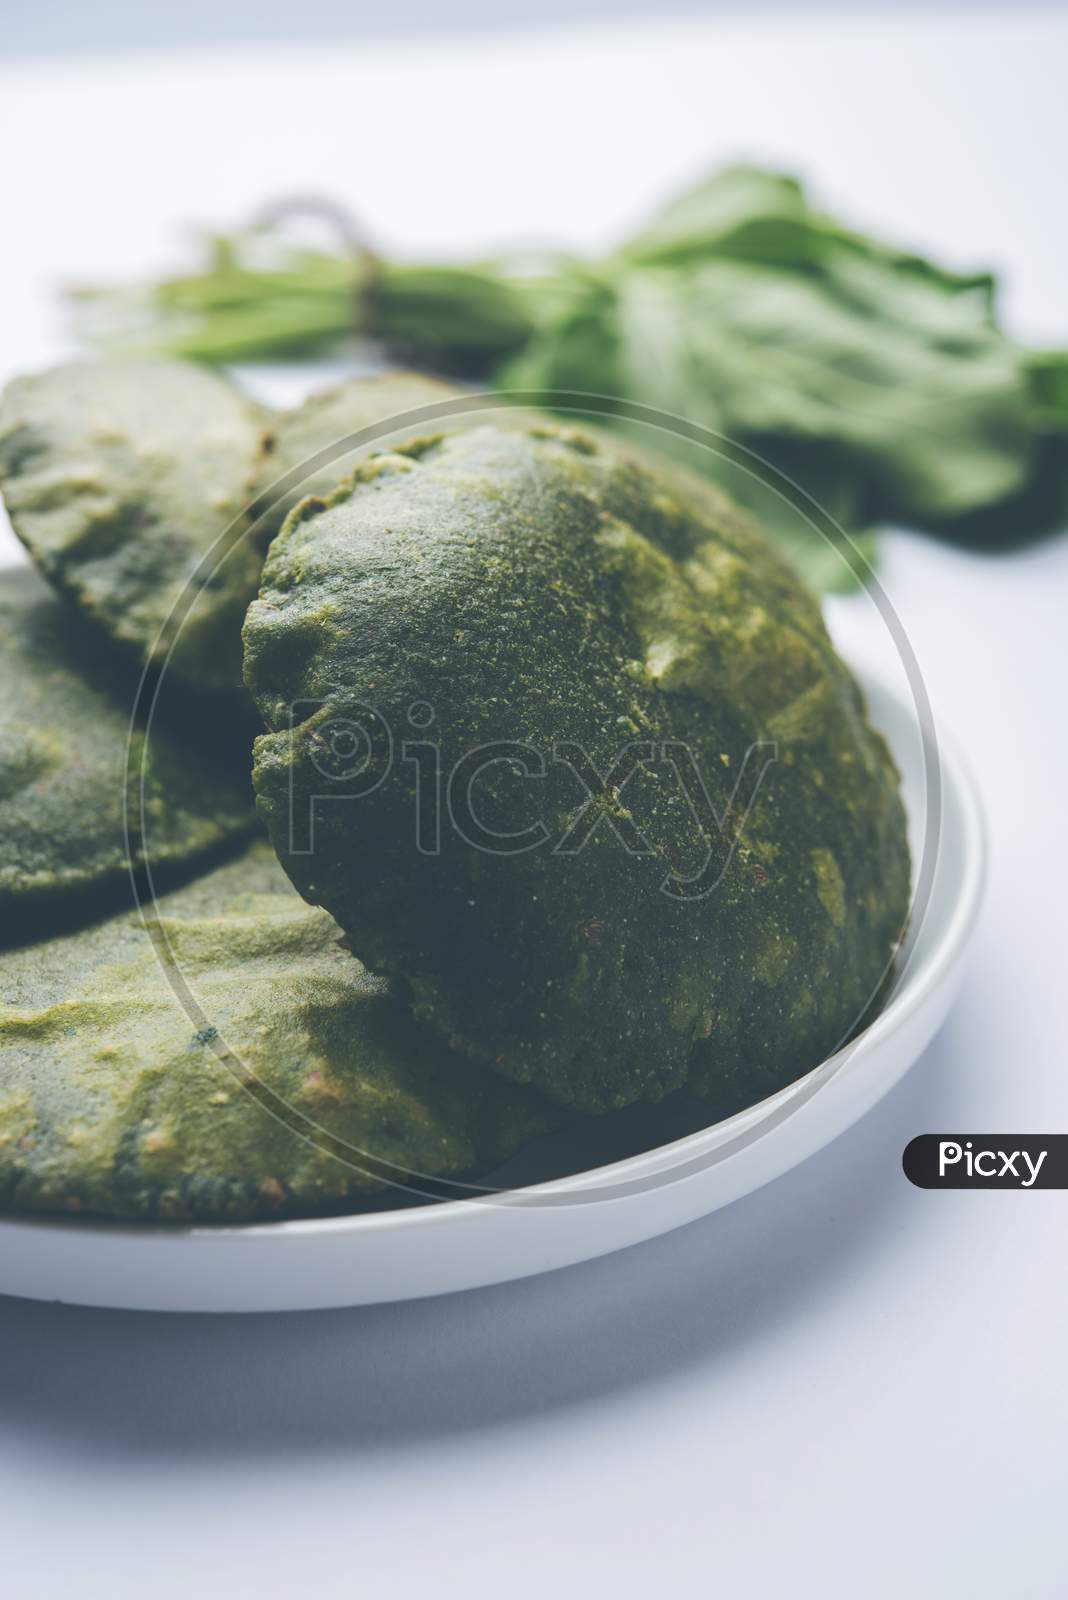 Image of Palak Puri or Spinach Poori-IE980277-Picxy